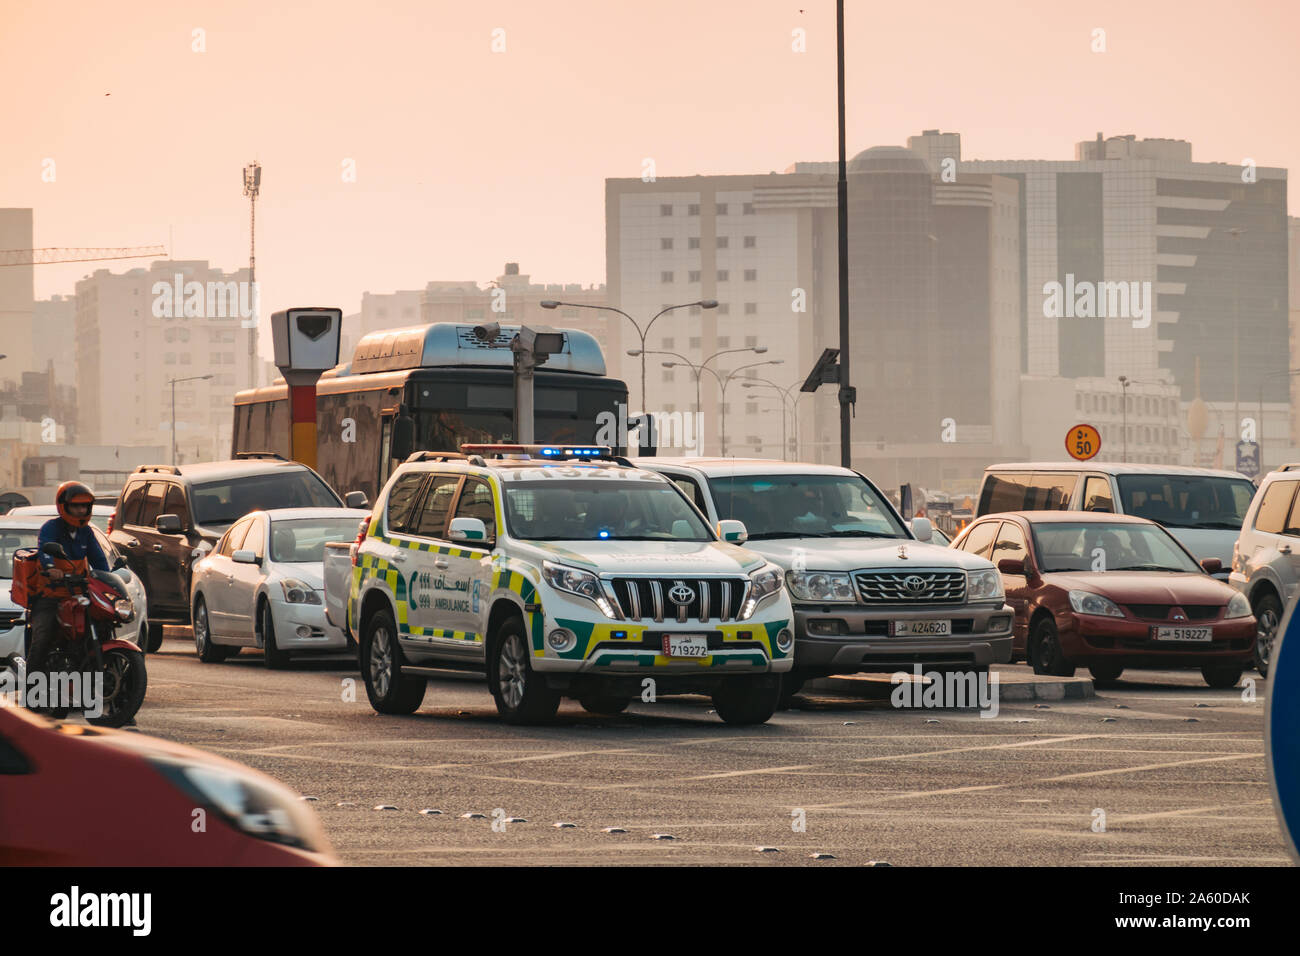 An advanced paramedic in an Toyota Prada SUV ambulance vehicle cuts through traffic at an intersection, en route to an emergency in Doha, Qatar Stock Photo